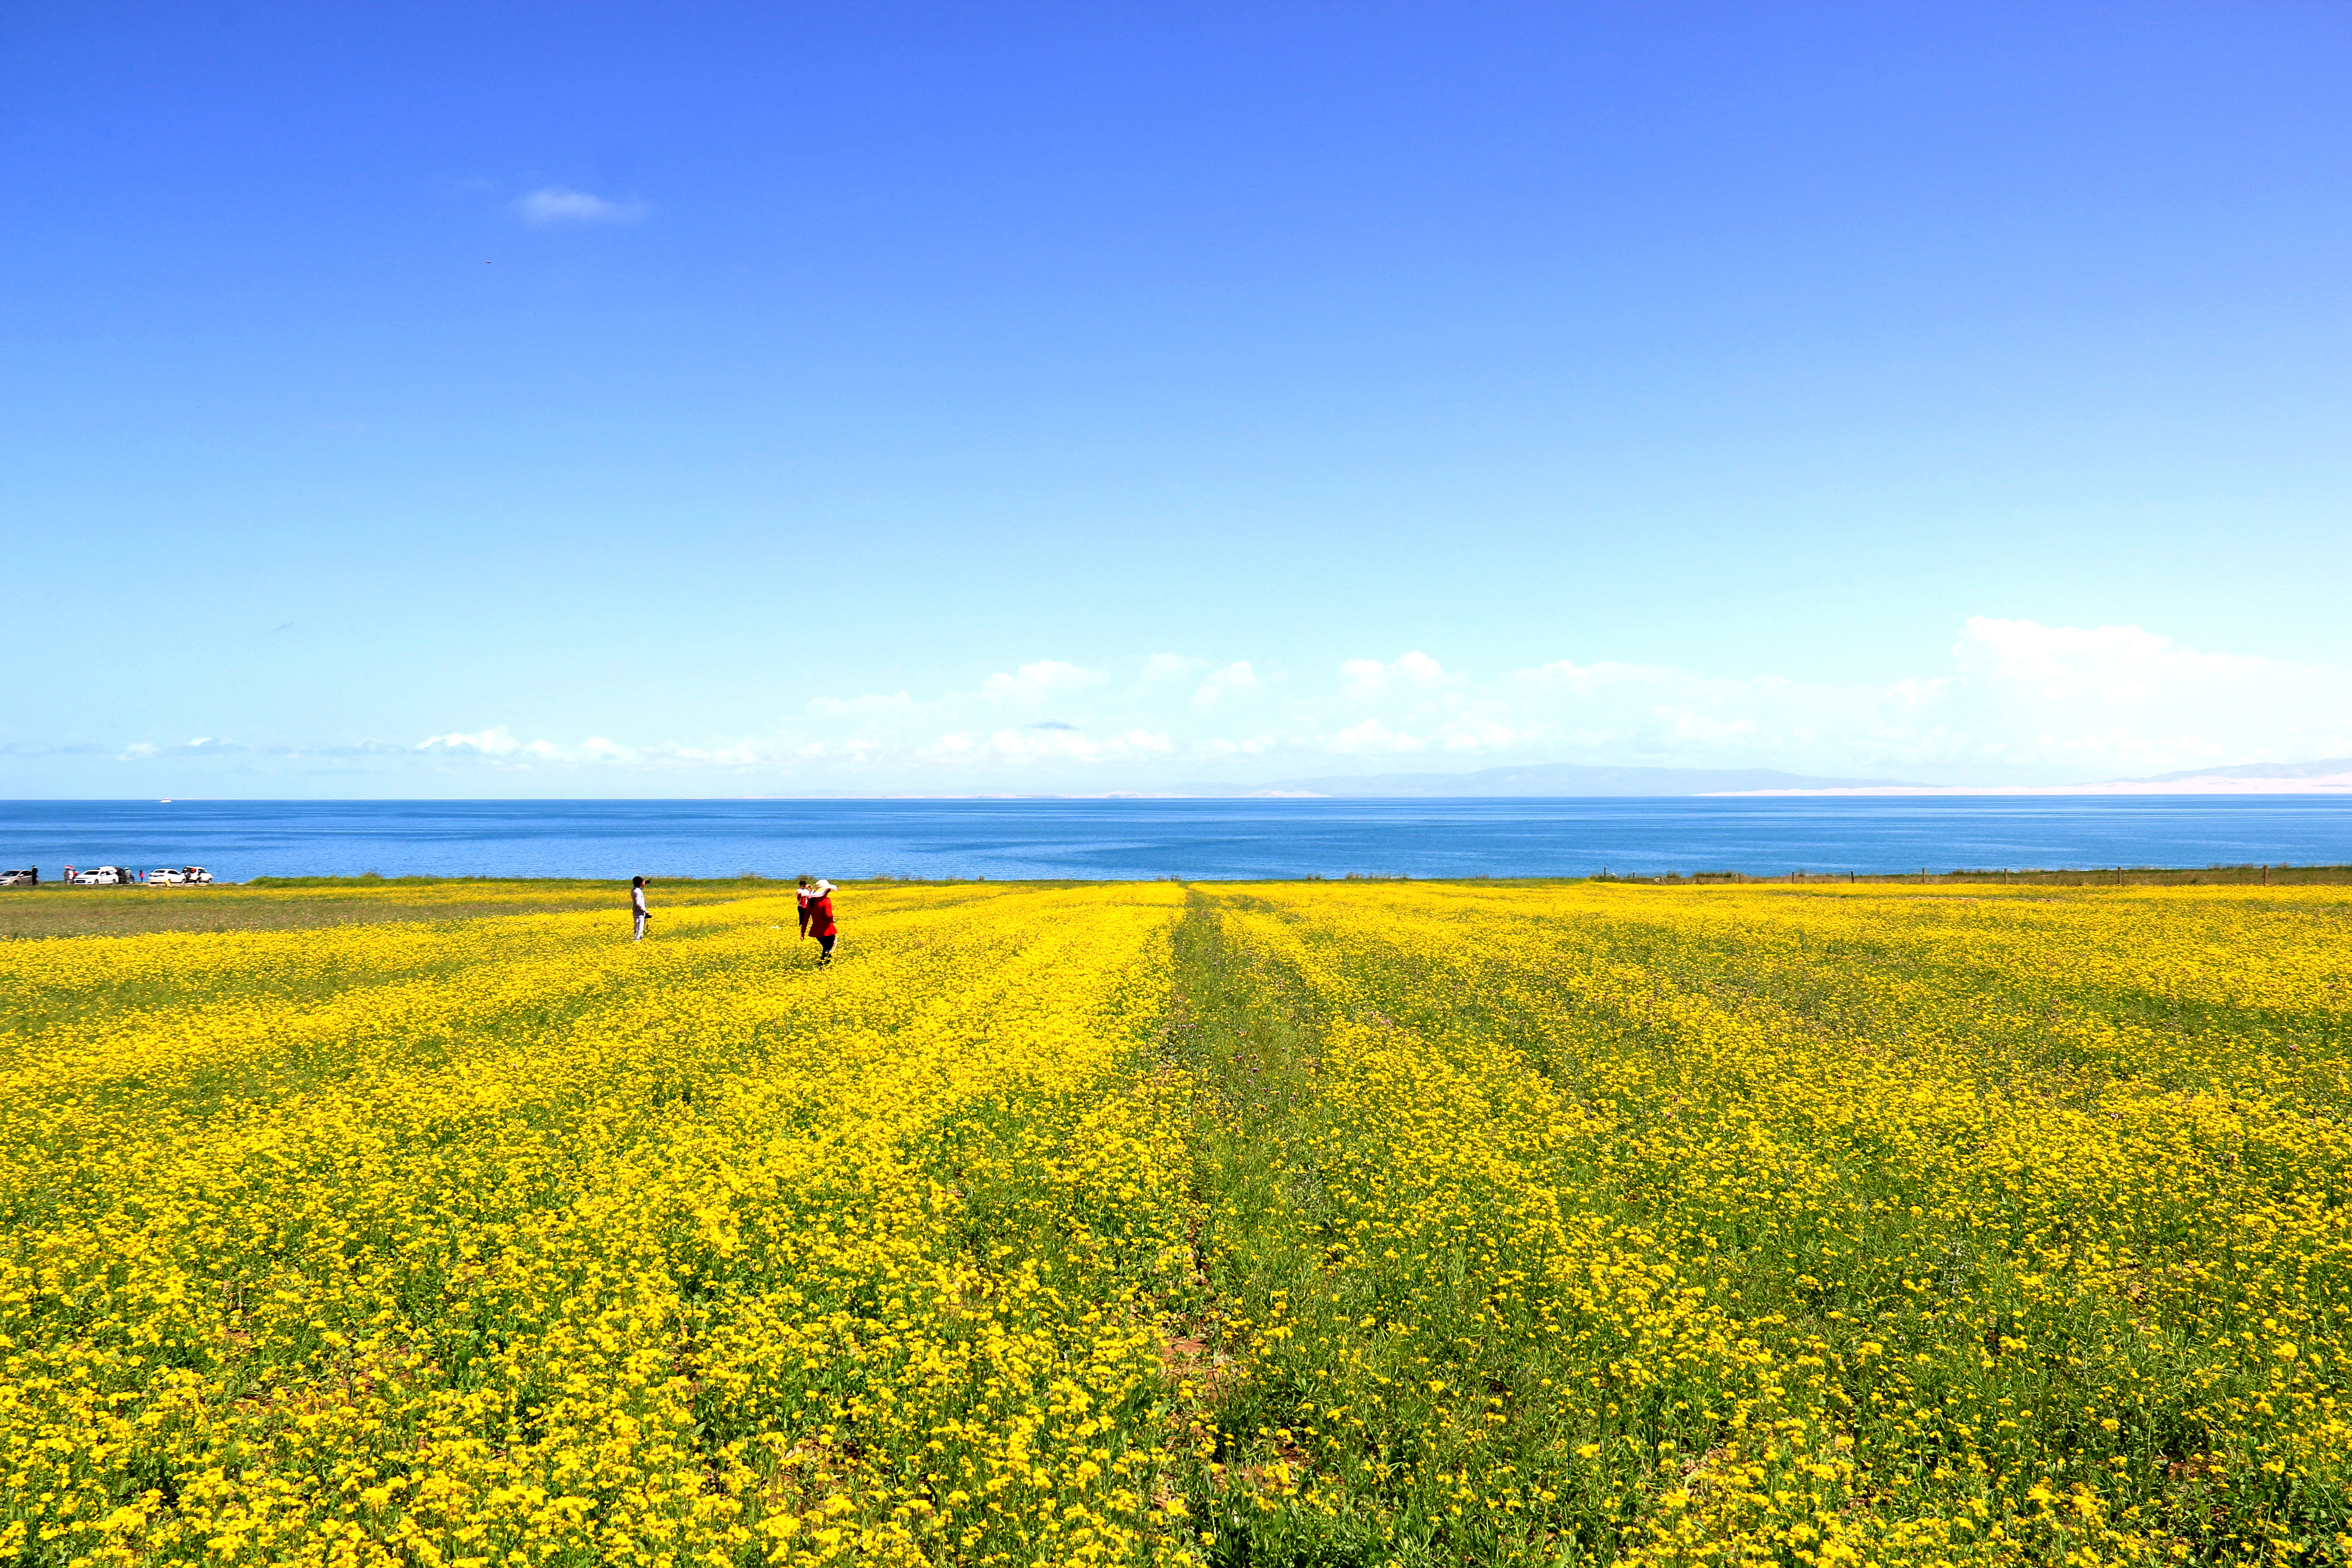 Qinghai Lake is the largest inland lake in China.